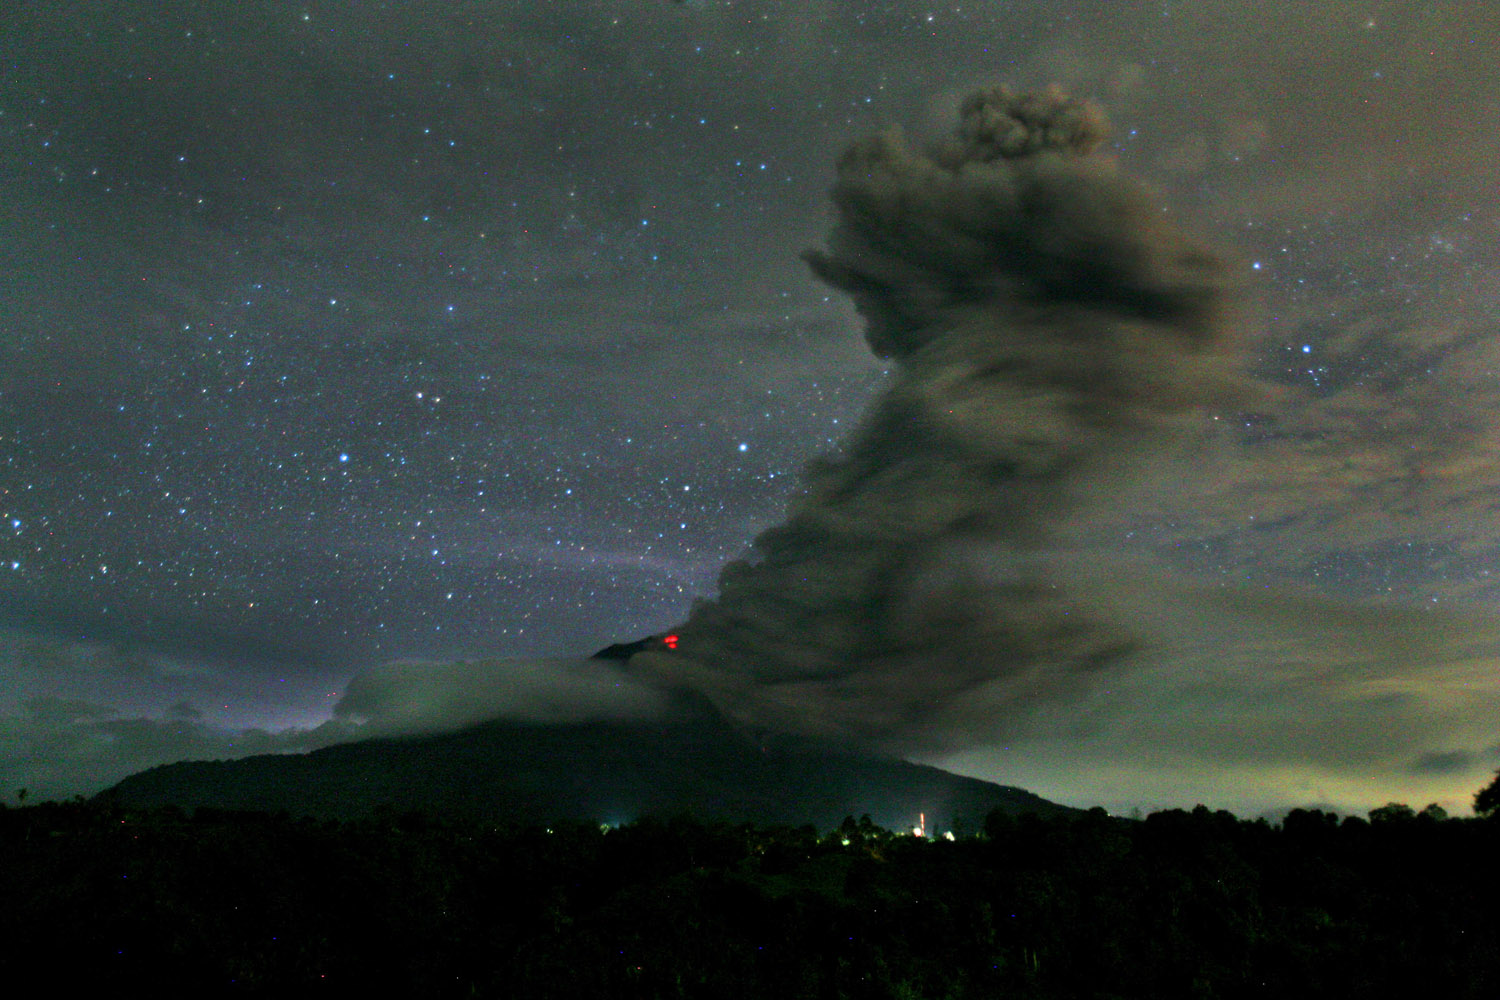 Nov. 24, 2013. Mount Sinabung spews volcanic ash into the air as seen from Tiga Pancur, North Sumatra, Indonesia.